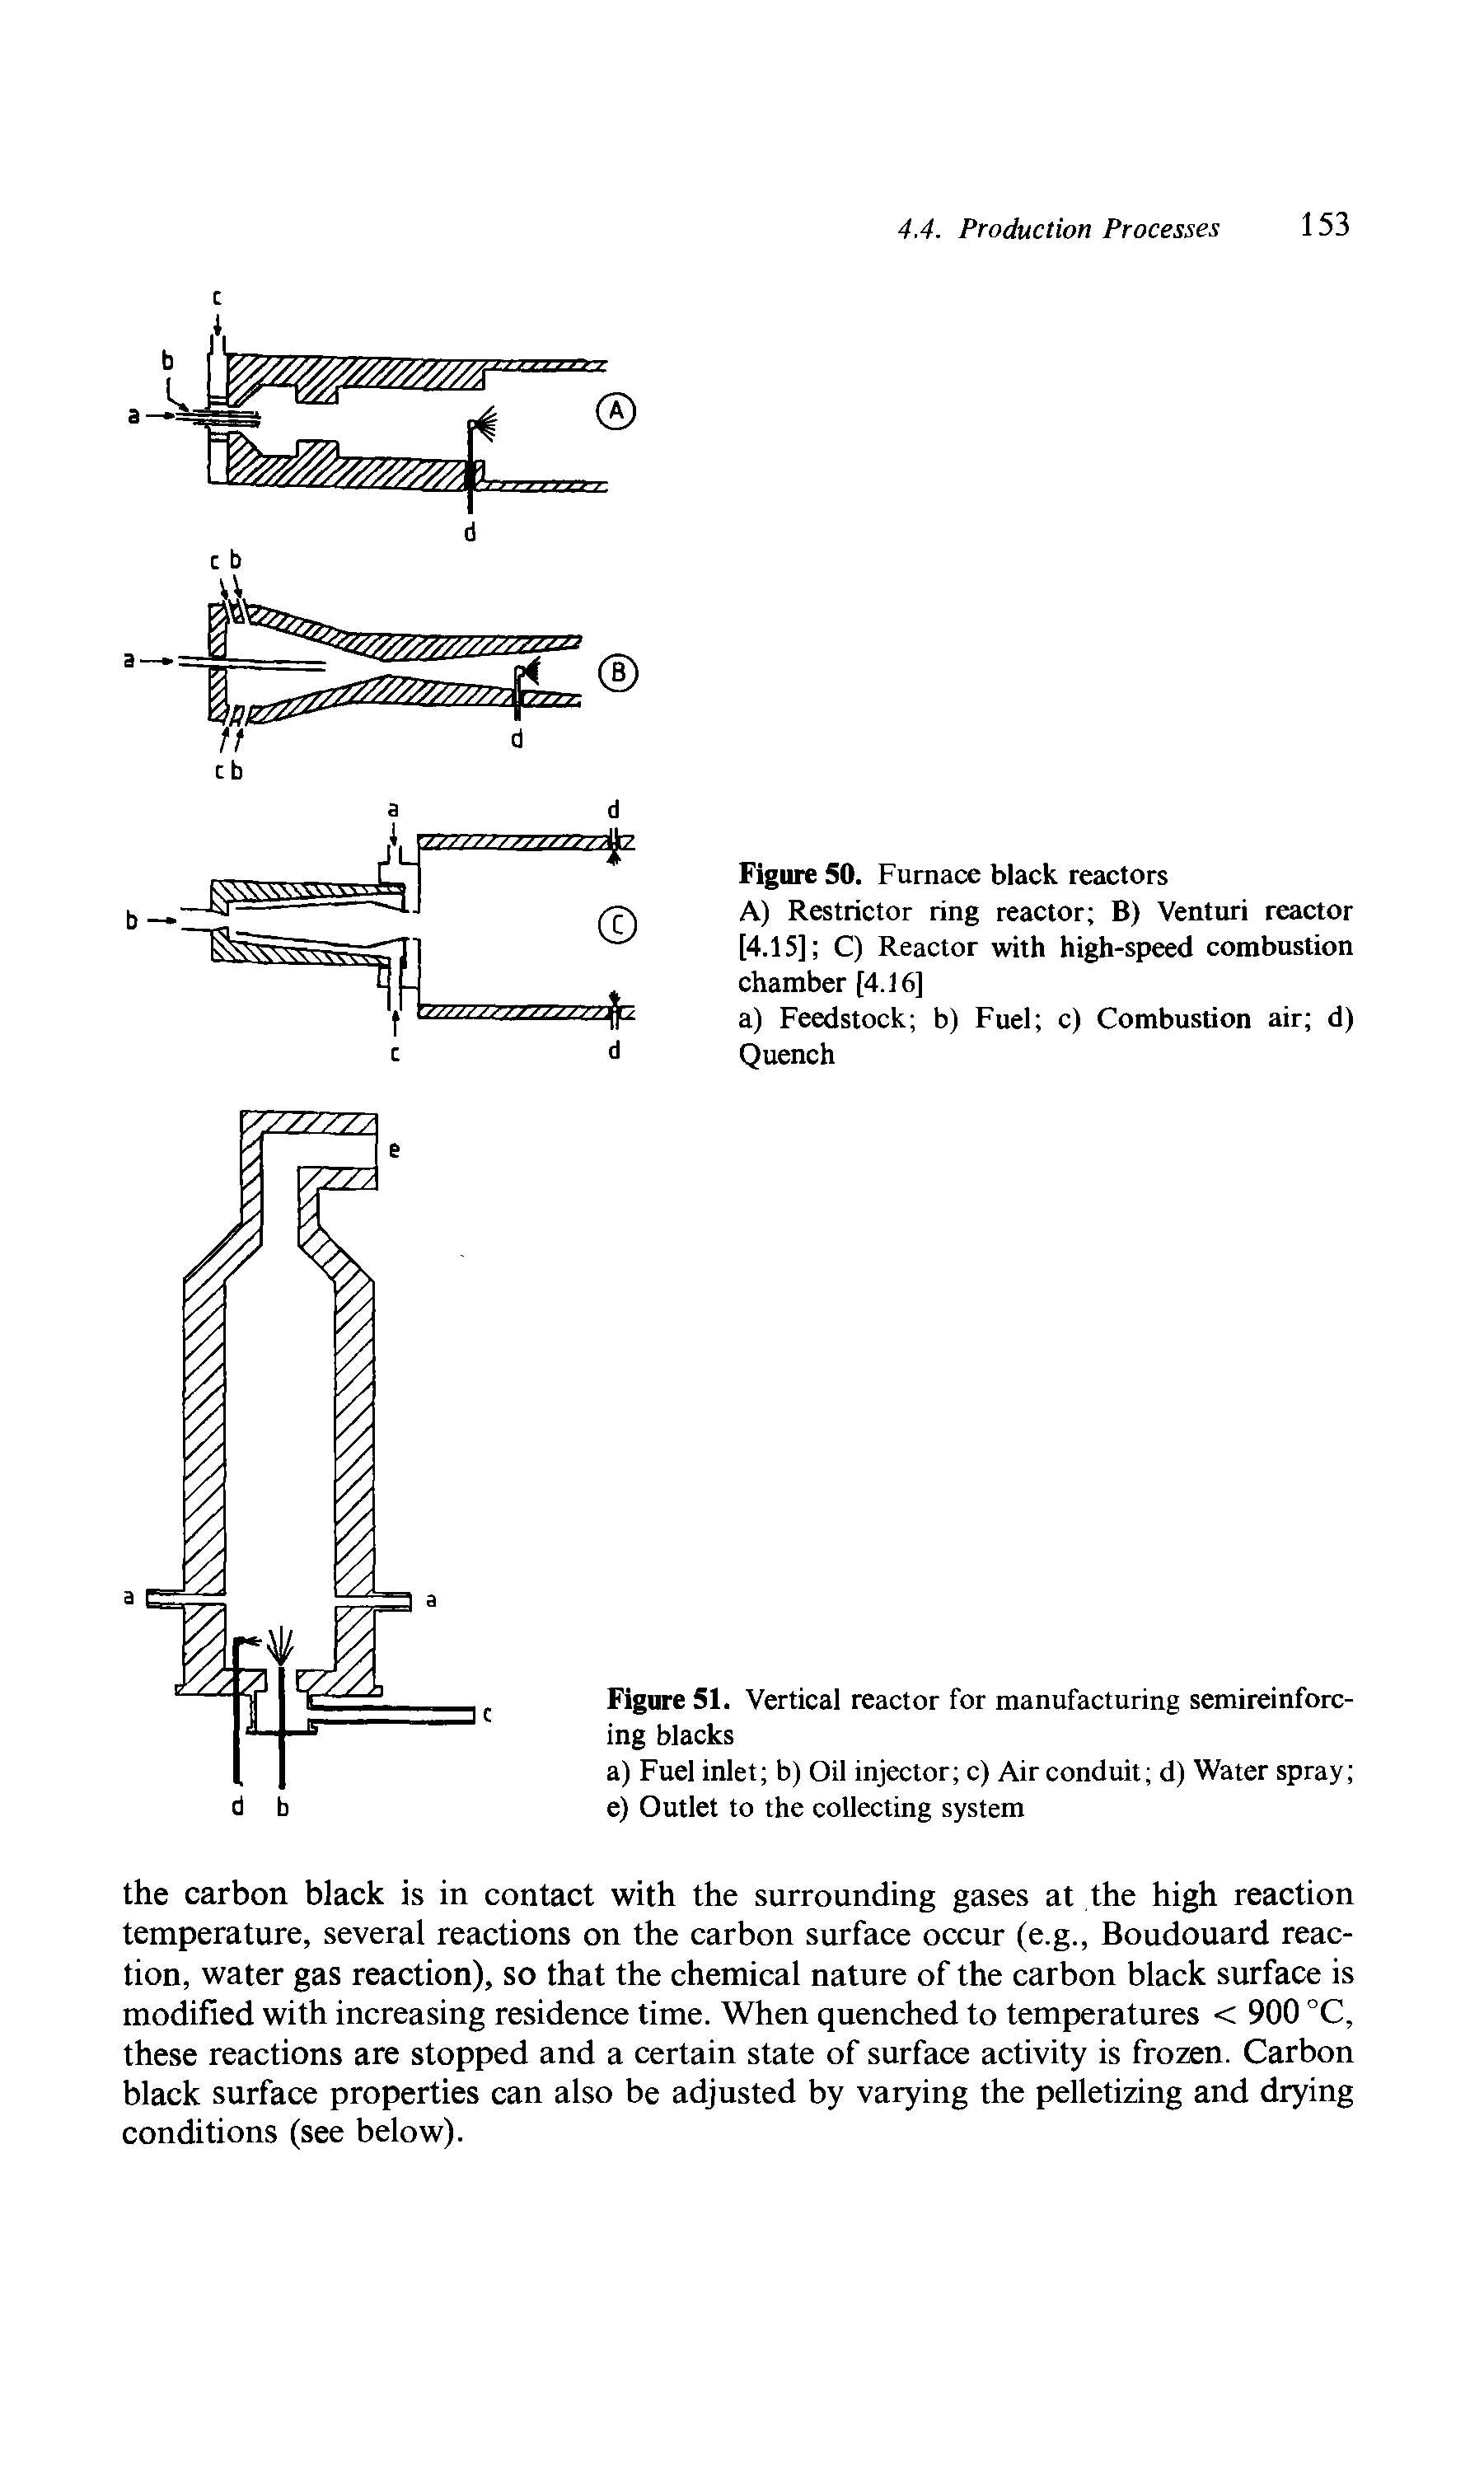 Figure 50. Furnace black reactors A) Restrictor ring reactor B) Venturi reactor [4.15] C) Reactor with high-speed combustion chamber [4.16]...